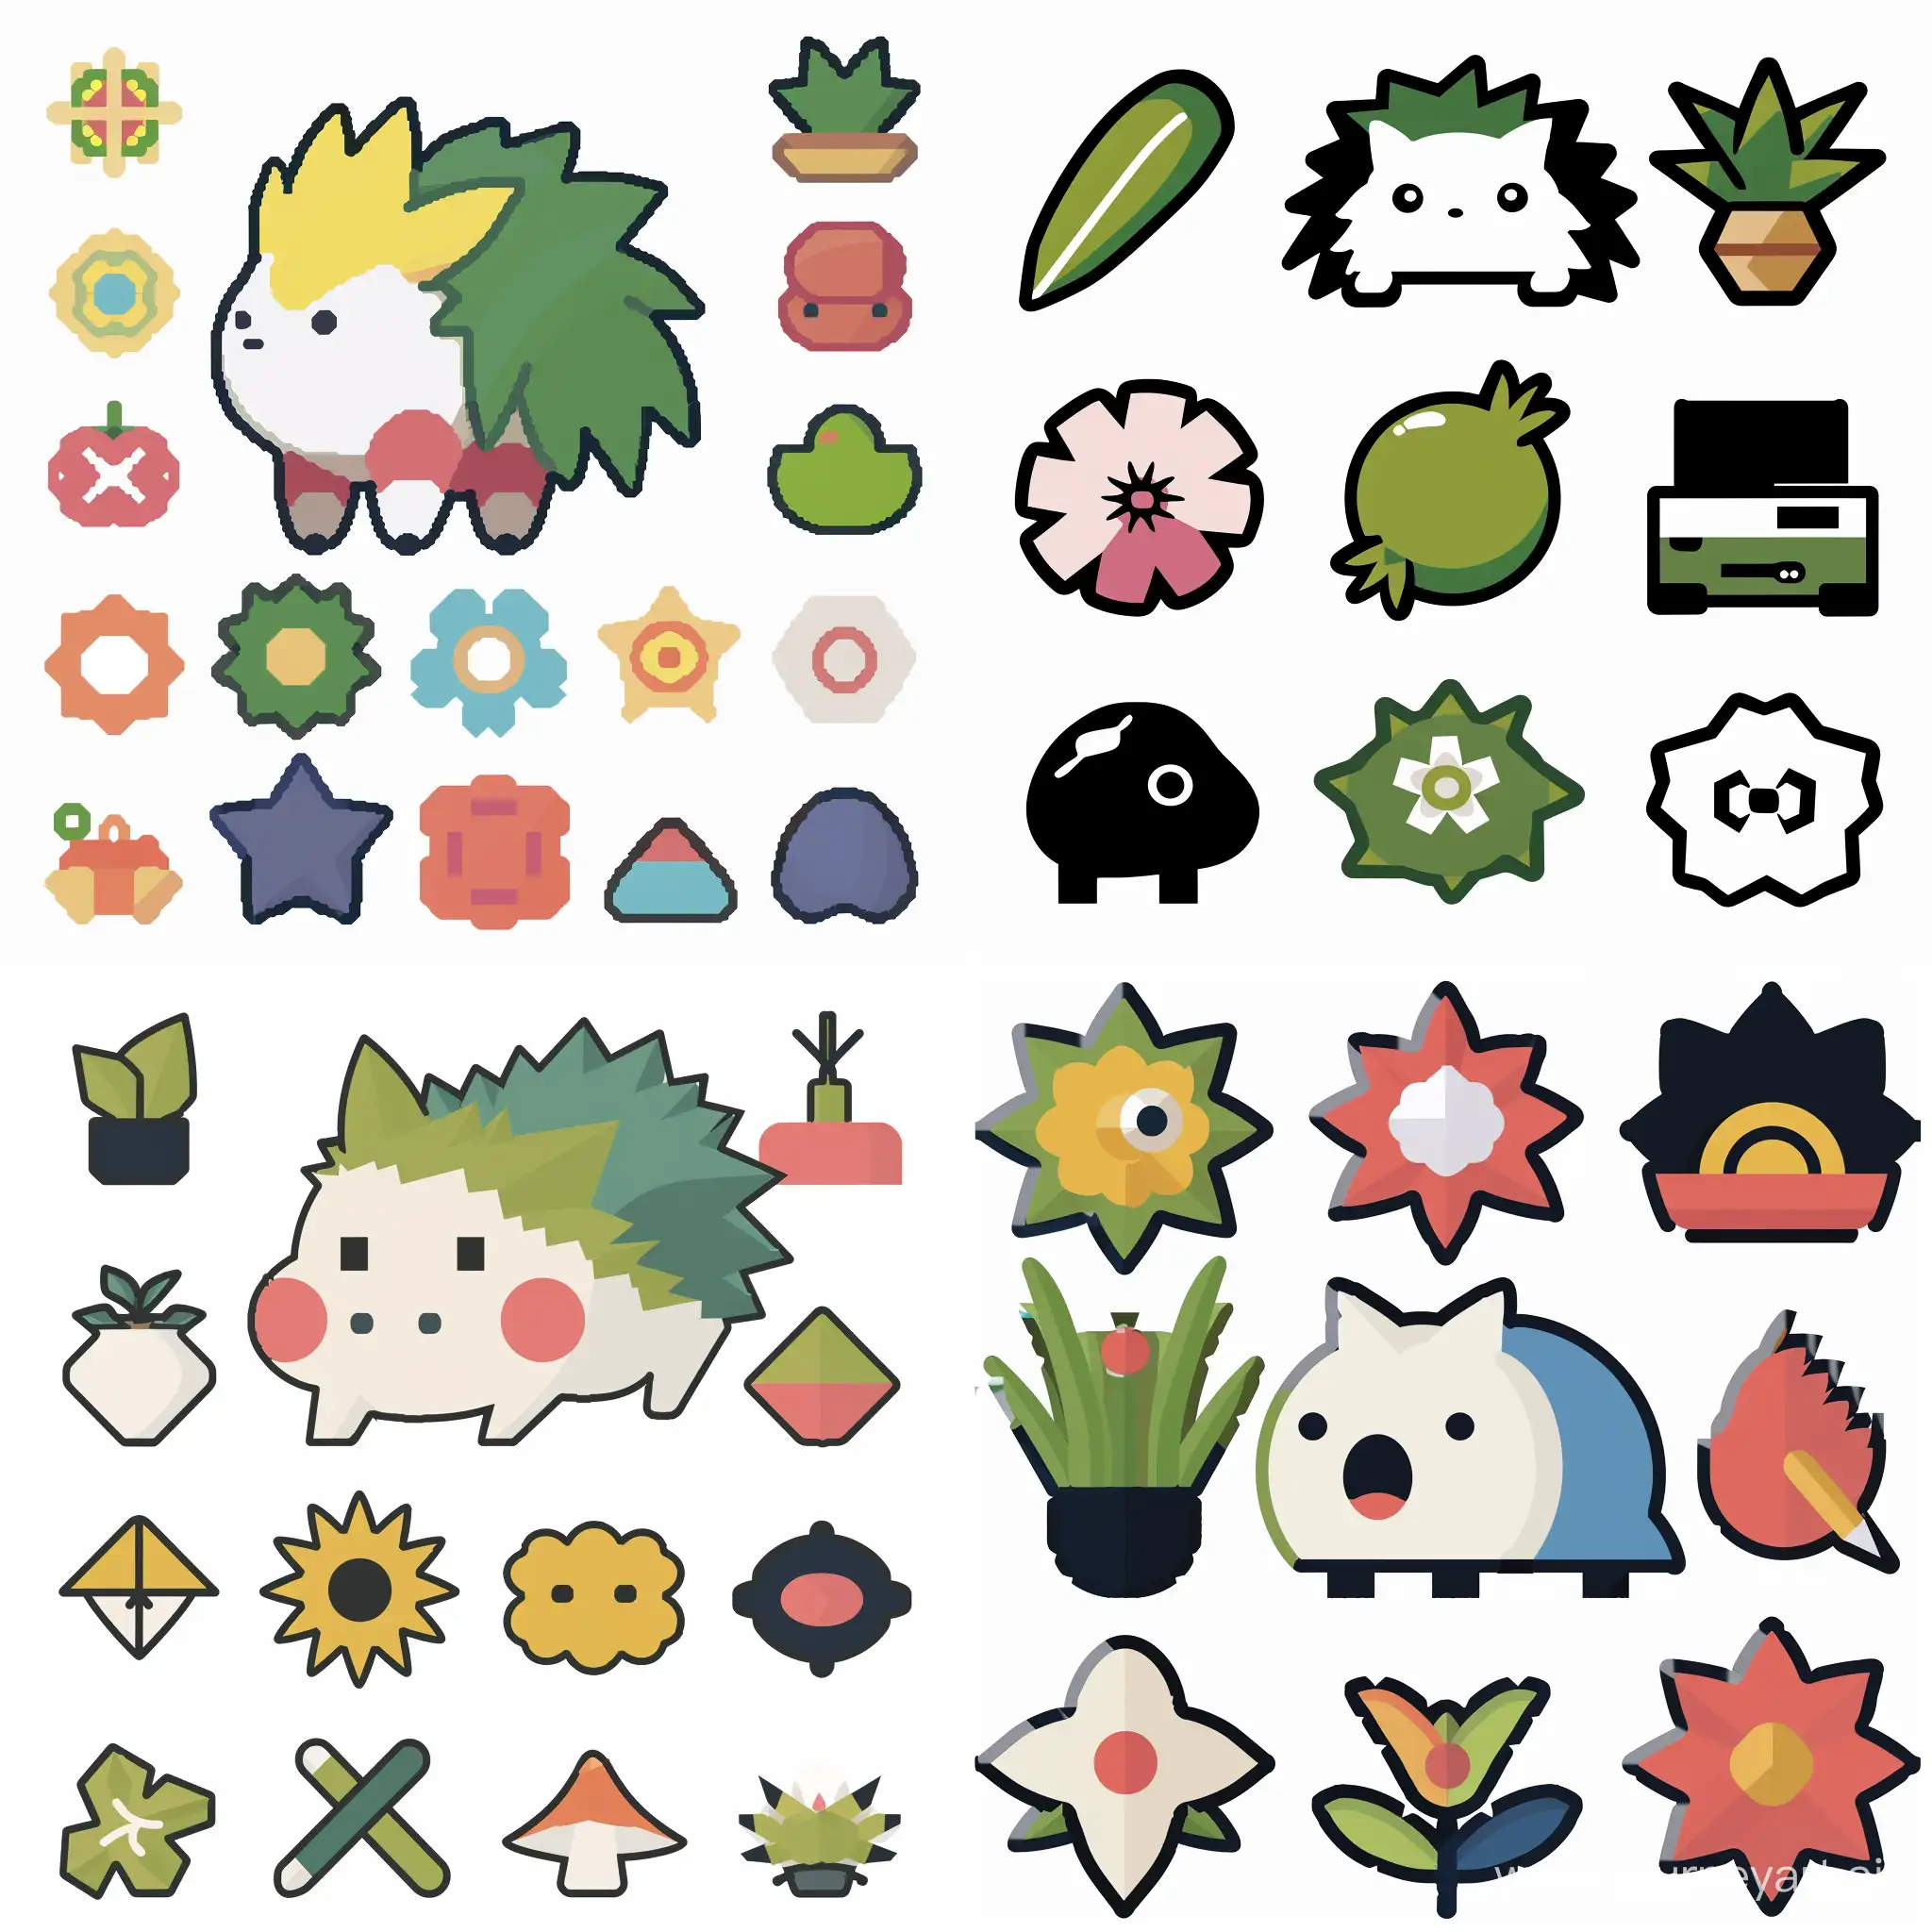 https://static.wikia.nocookie.net/pokepediabr/images/6/61/492Shaymin.png/revision/latest/scale-to-width-down/180?cb=20211222223550&path-prefix=pt-br digital icon sheet, simple shapes, white background